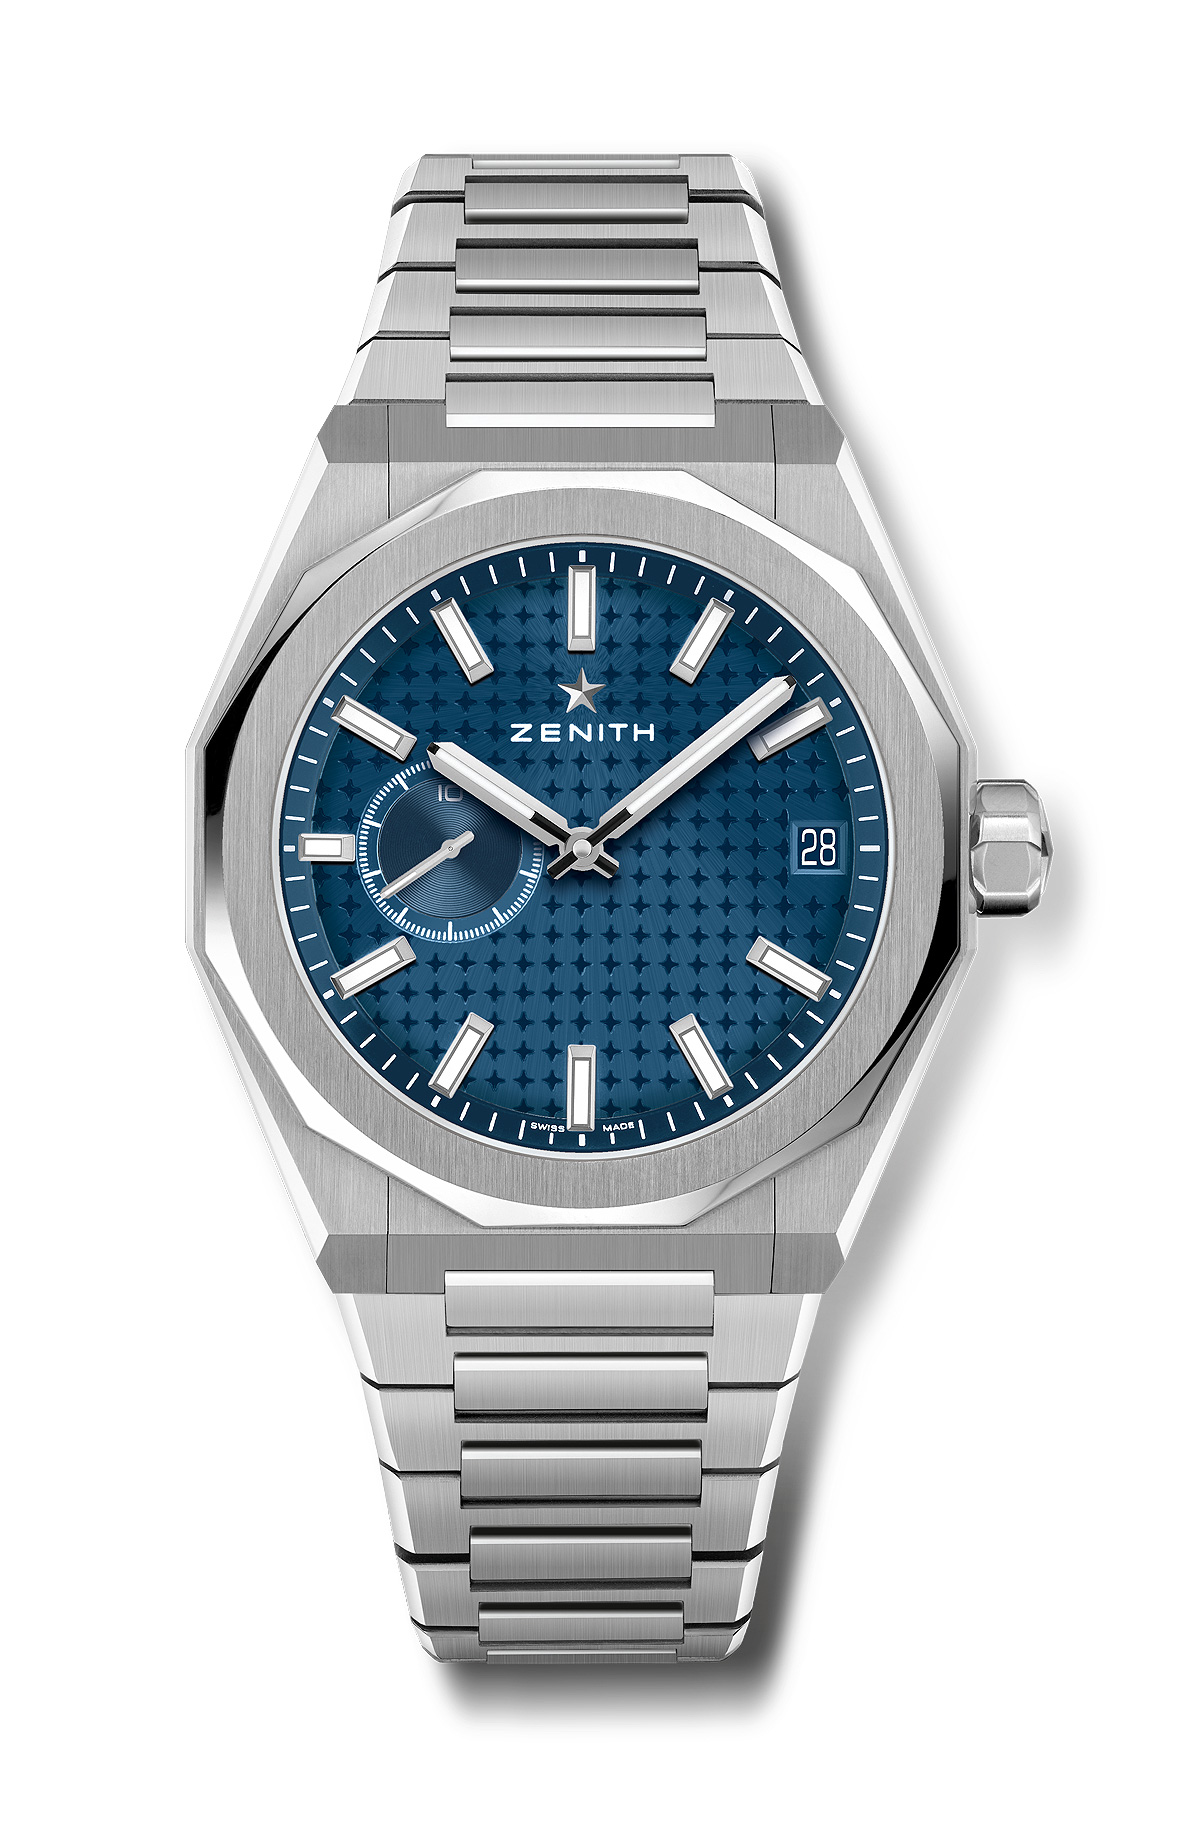 Zenith Introduces the Defy Skyline, with Another Variation on the El ...